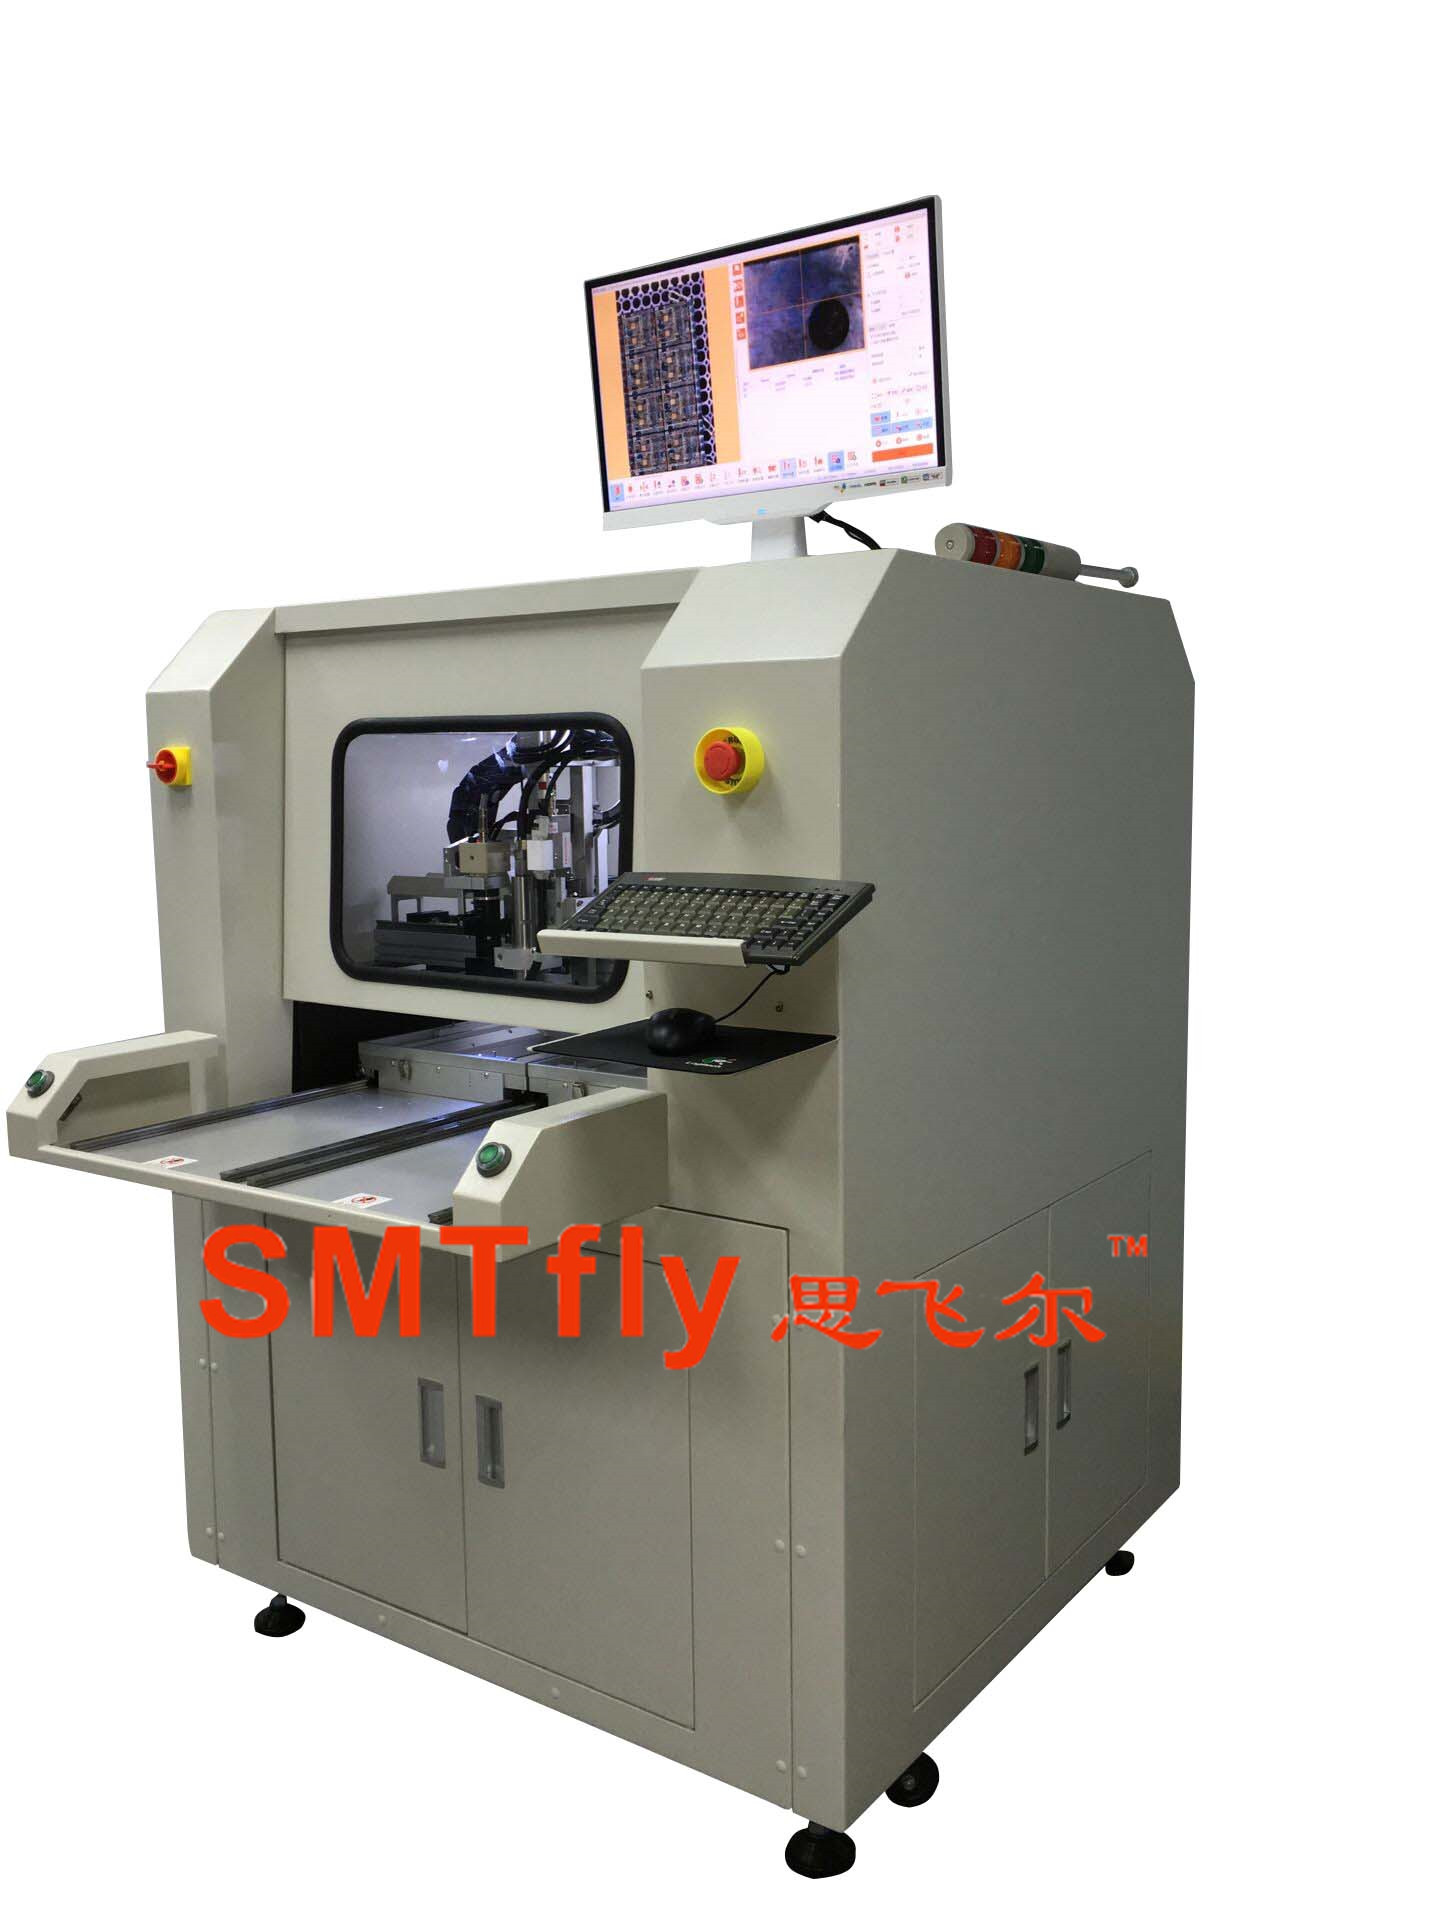 PCB Router Equipment for Milling Joints Connection Panel,SMTfly-F02